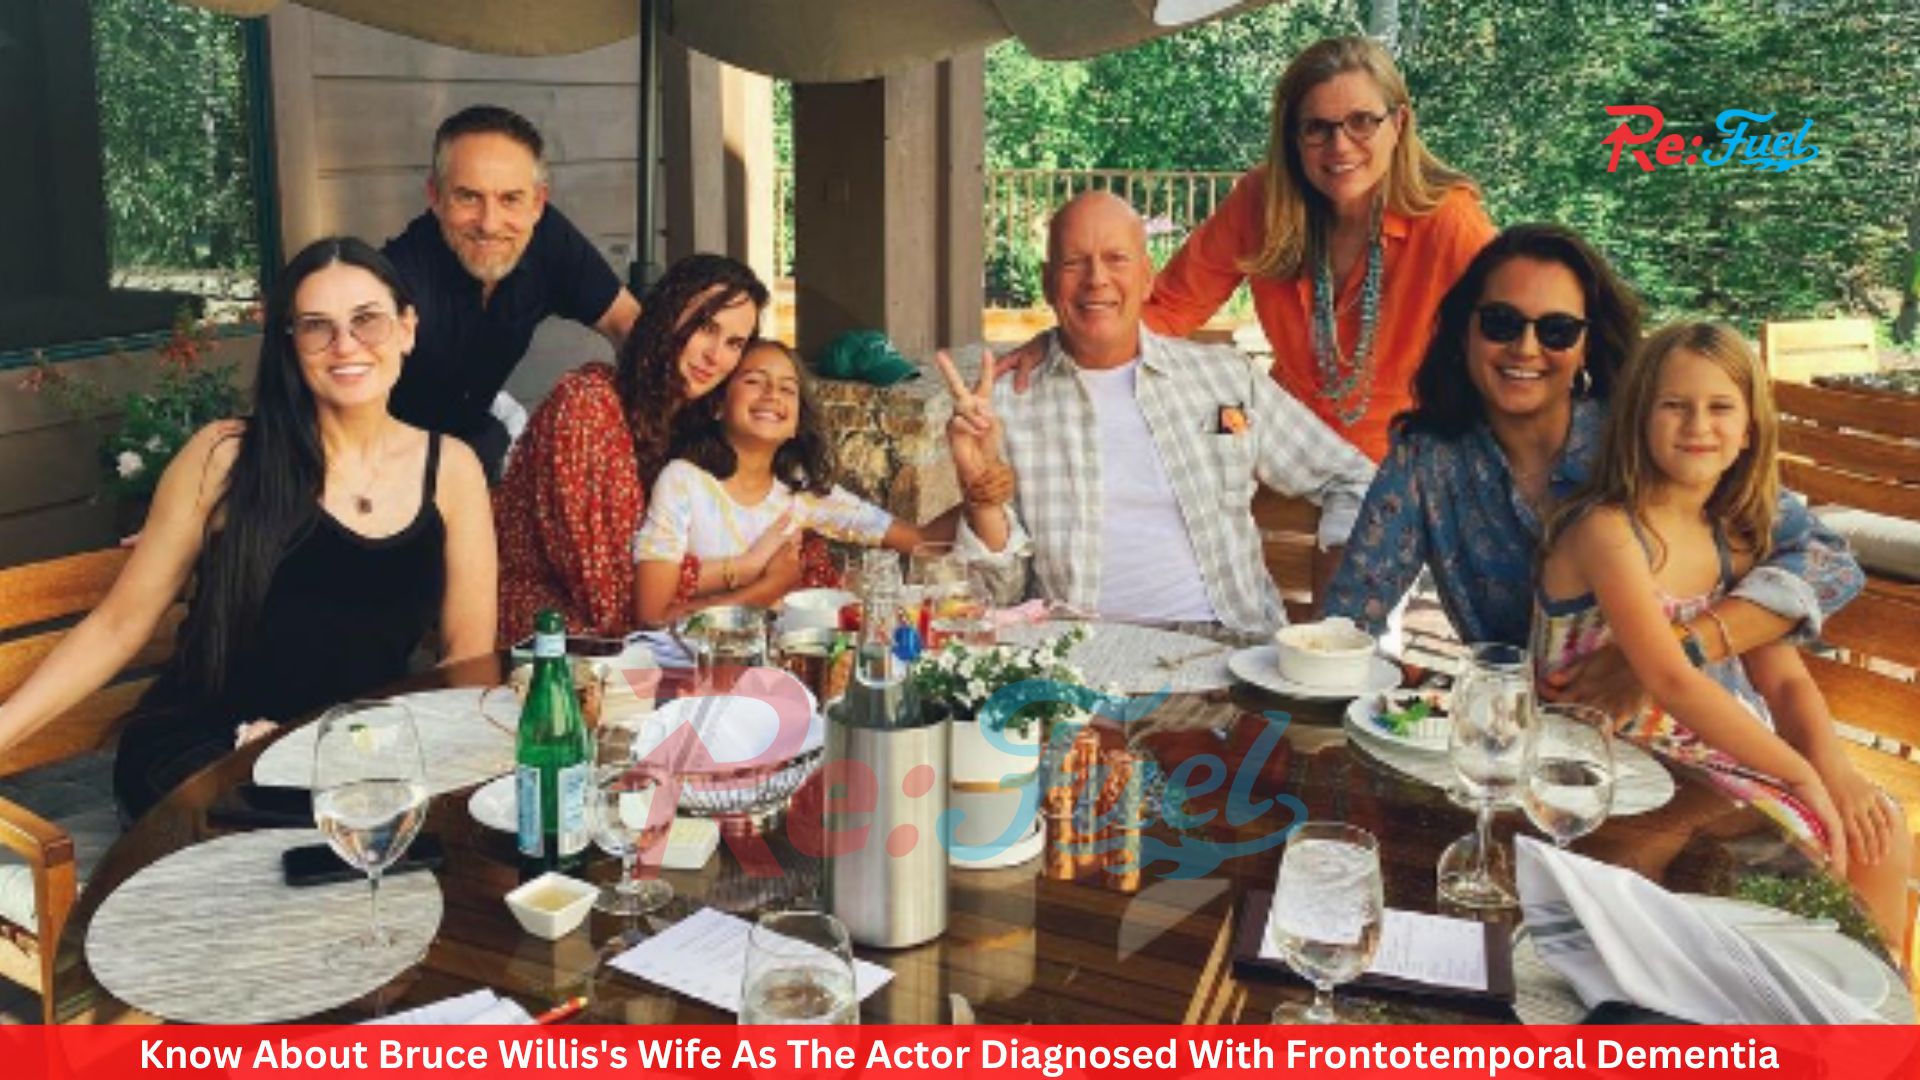 Know About Bruce Willis's Wife As The Actor Diagnosed With Frontotemporal Dementia